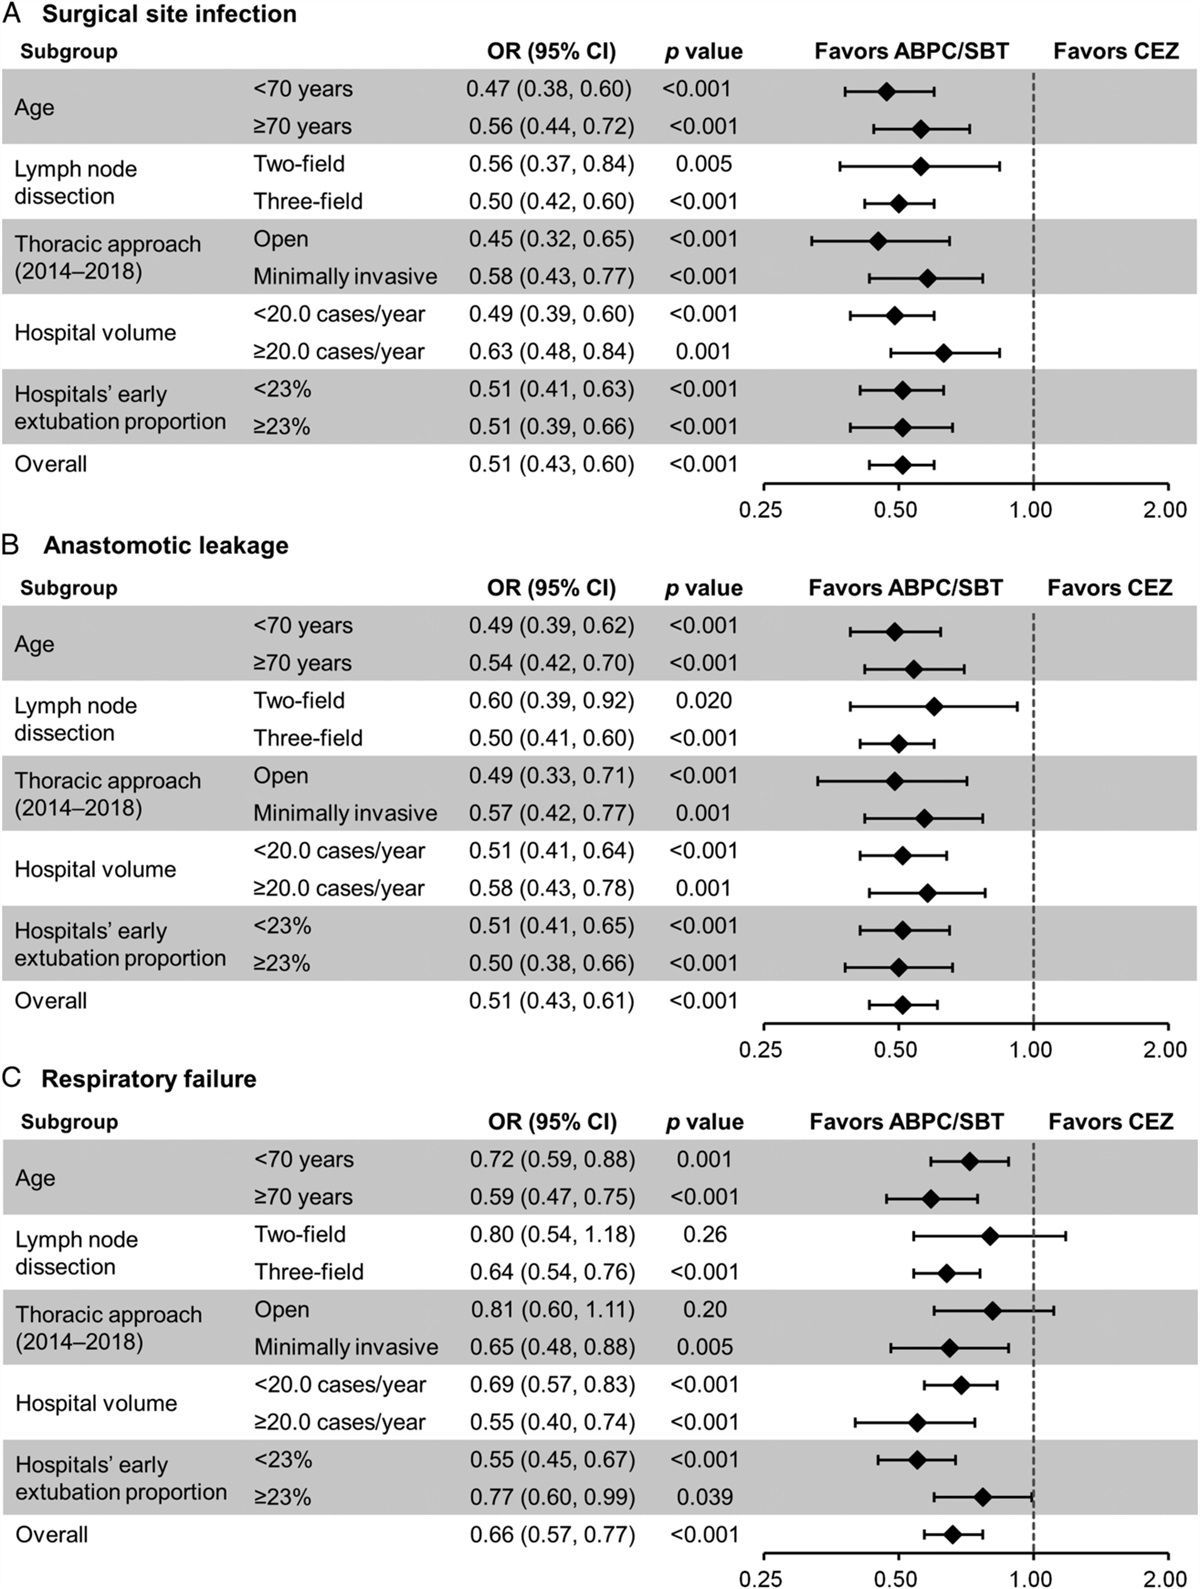 Antimicrobial Prophylaxis With Ampicillin-sulbactam Compared With Cefazolin for Esophagectomy: Nationwide Inpatient Database Study in Japan